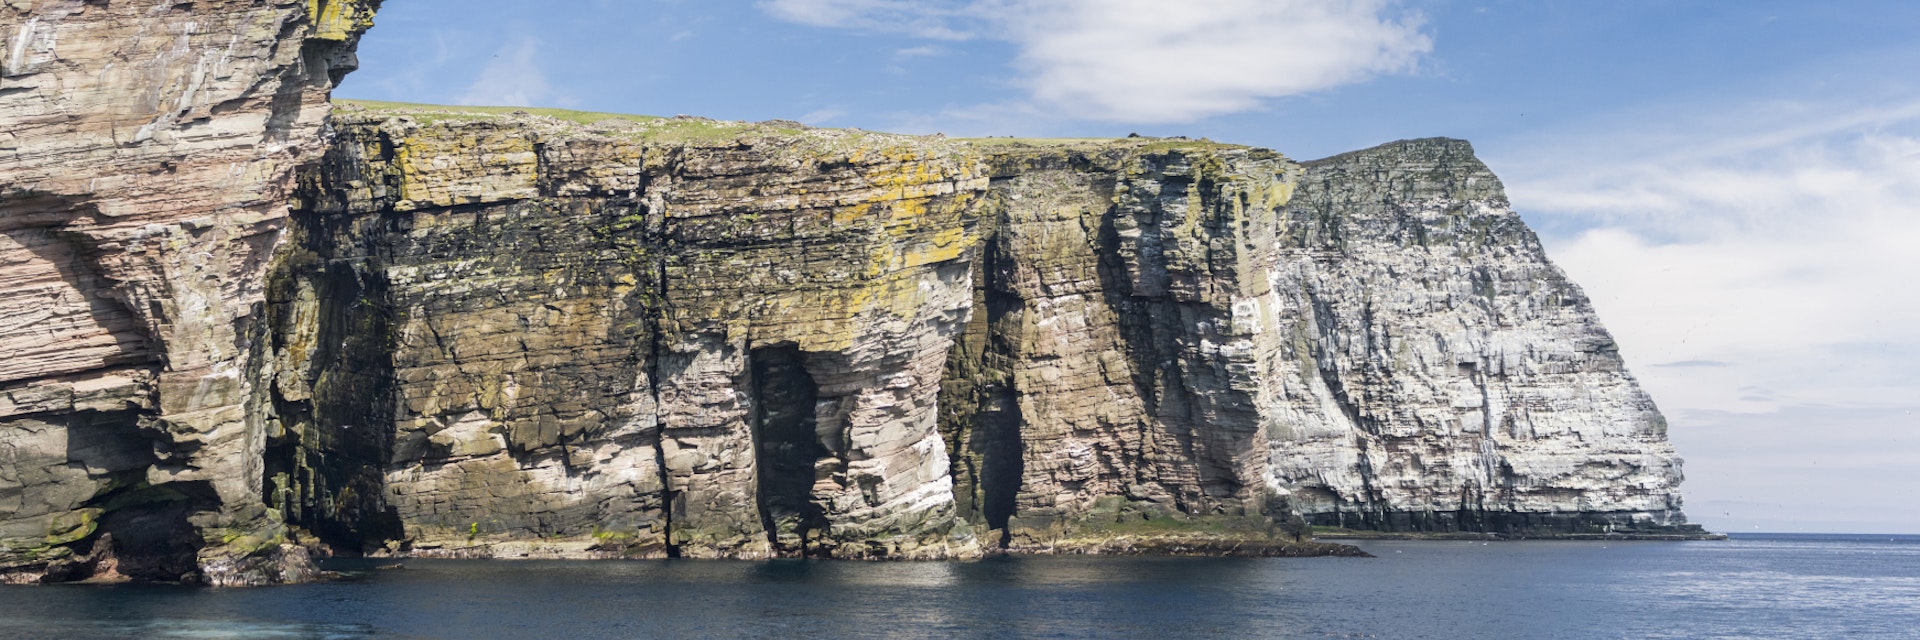 In geography and geology, a cliff is a vertical, or near vertical, rock exposure. Cliffs are formed as erosion landforms due to the processes of erosion and weathering that produce them. Cliffs are common on coasts, in mountainous areas, escarpments and along rivers. Cliffs are usually formed by rock that is resistant to erosion and weathering. Sedimentary rocks most likely to form cliffs include sandstone, limestone, chalk, and dolomite. Igneous rocks such as granite and basalt also often form cliffs.